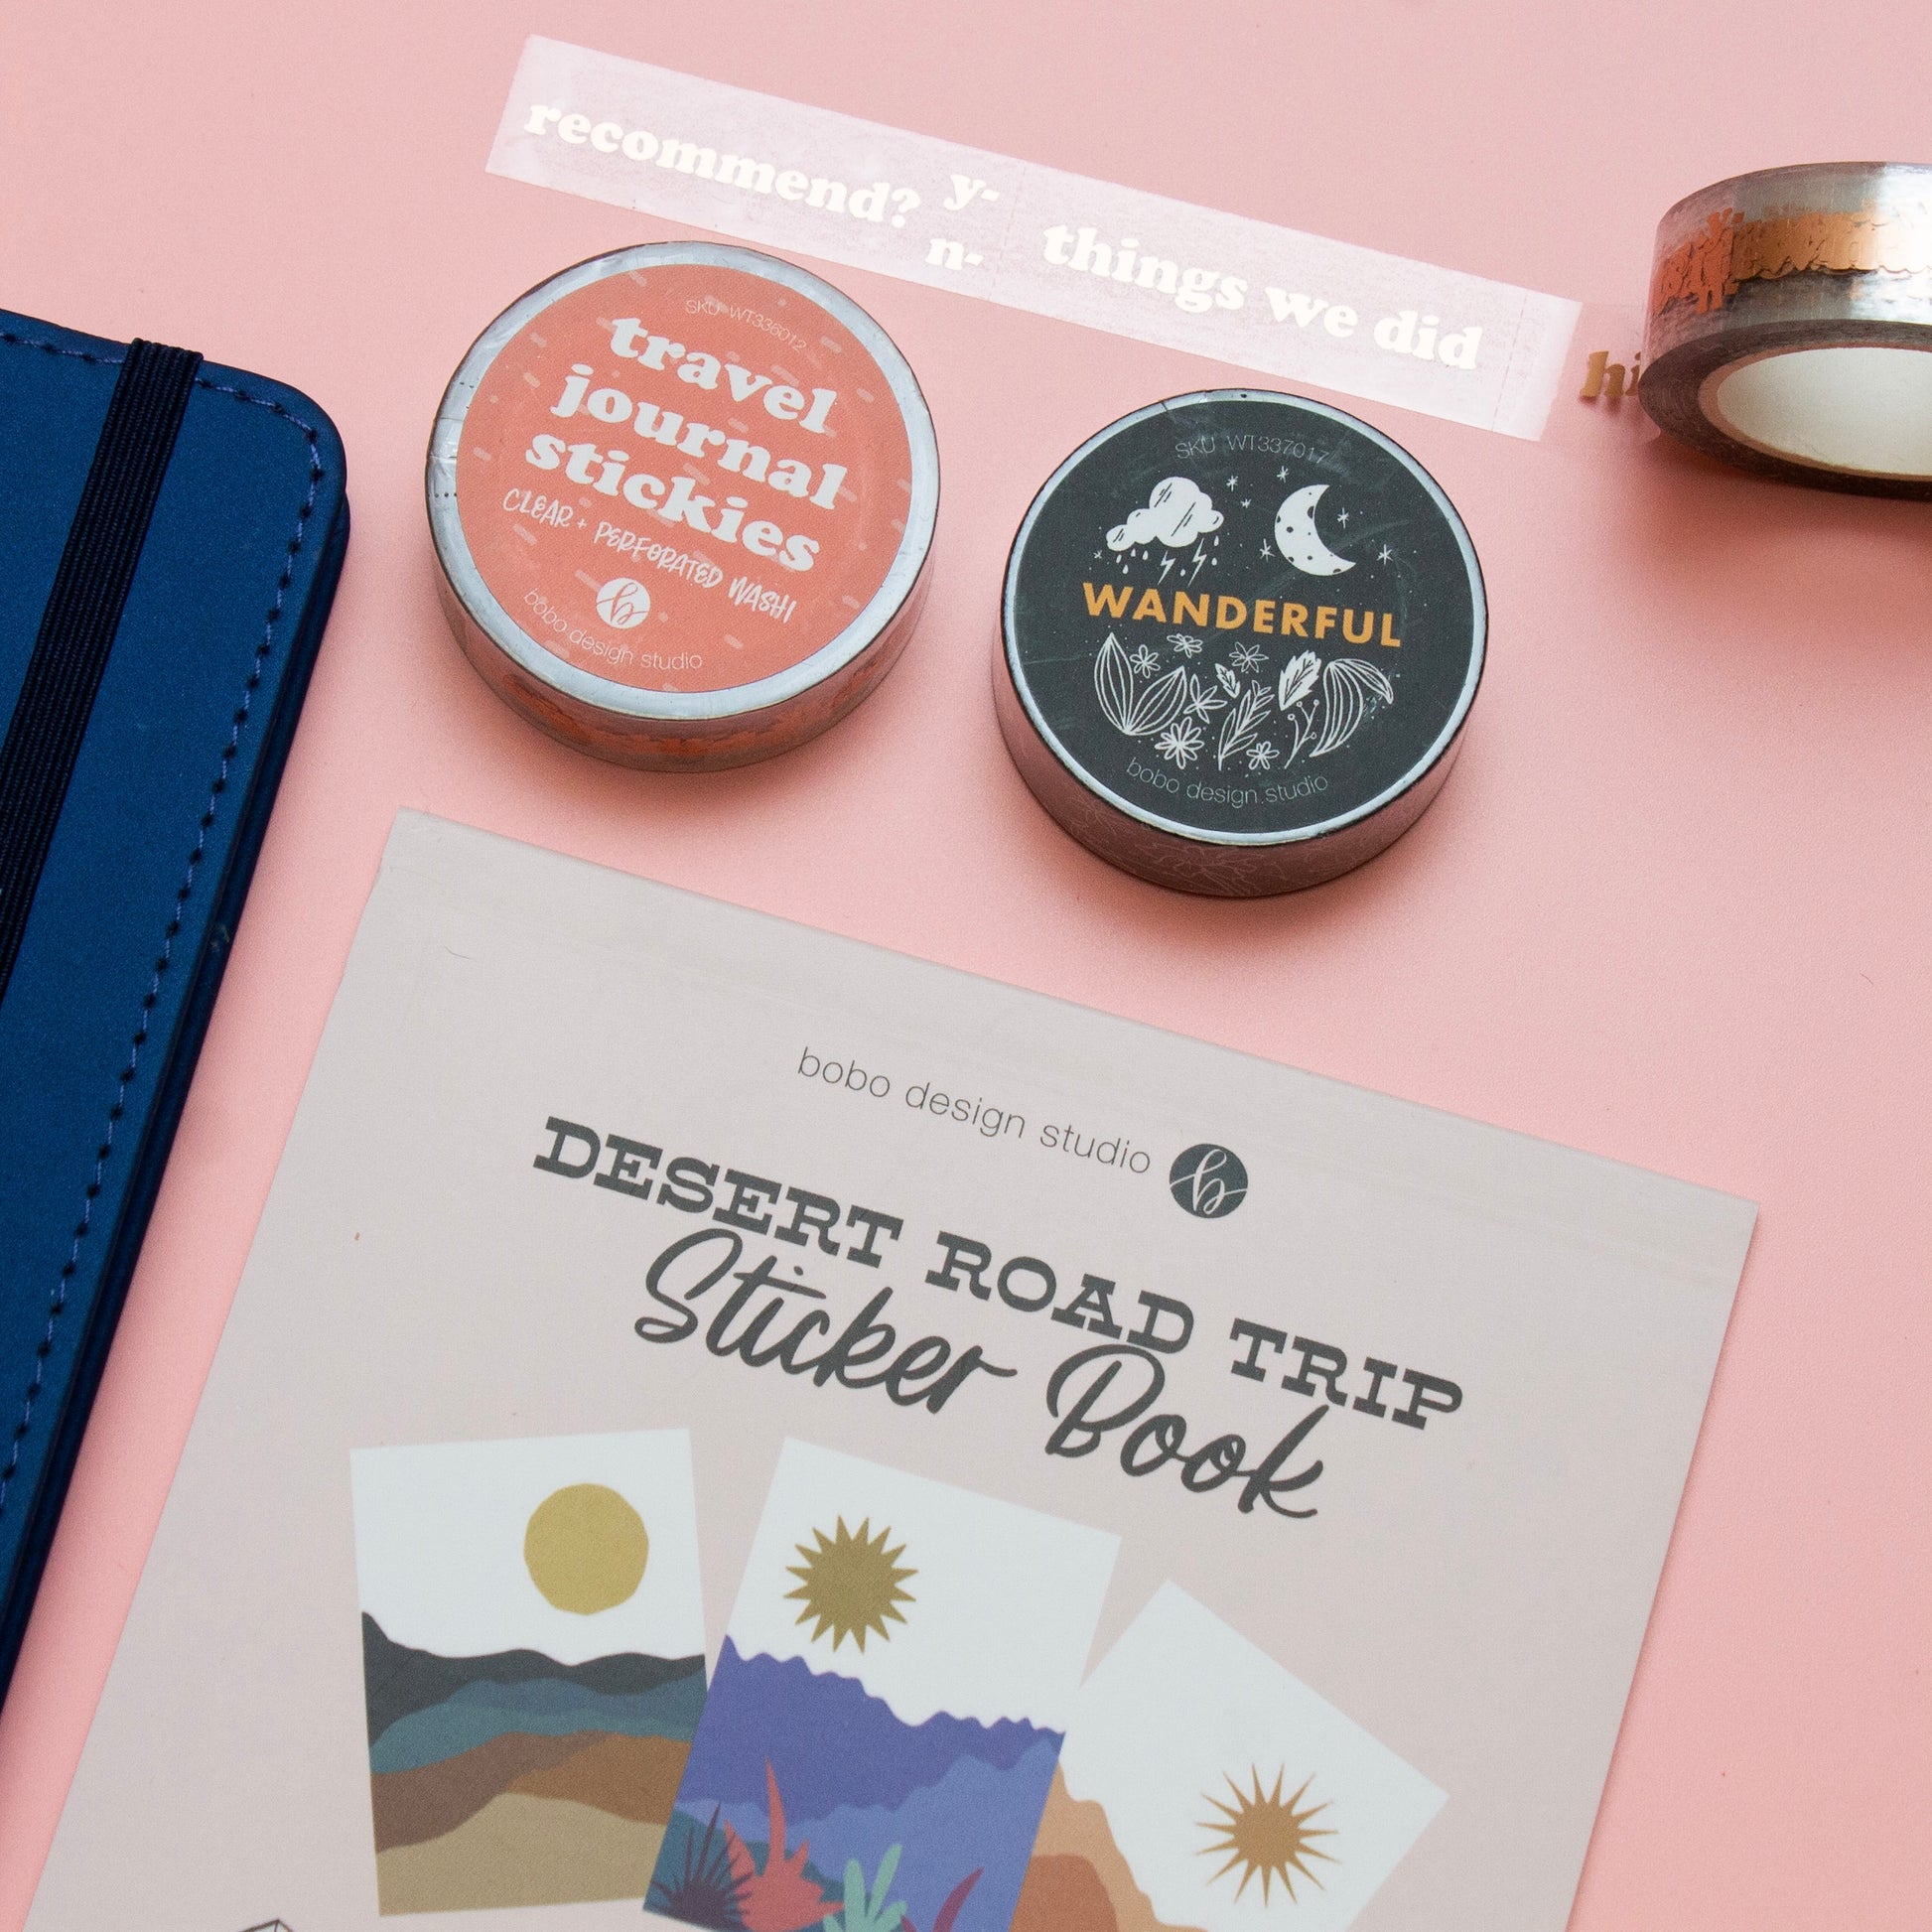 Wanderlust Passport Travel Journal Starter Kit has everything you need to get started on your travel documenting journey, including sticker and washi tape!